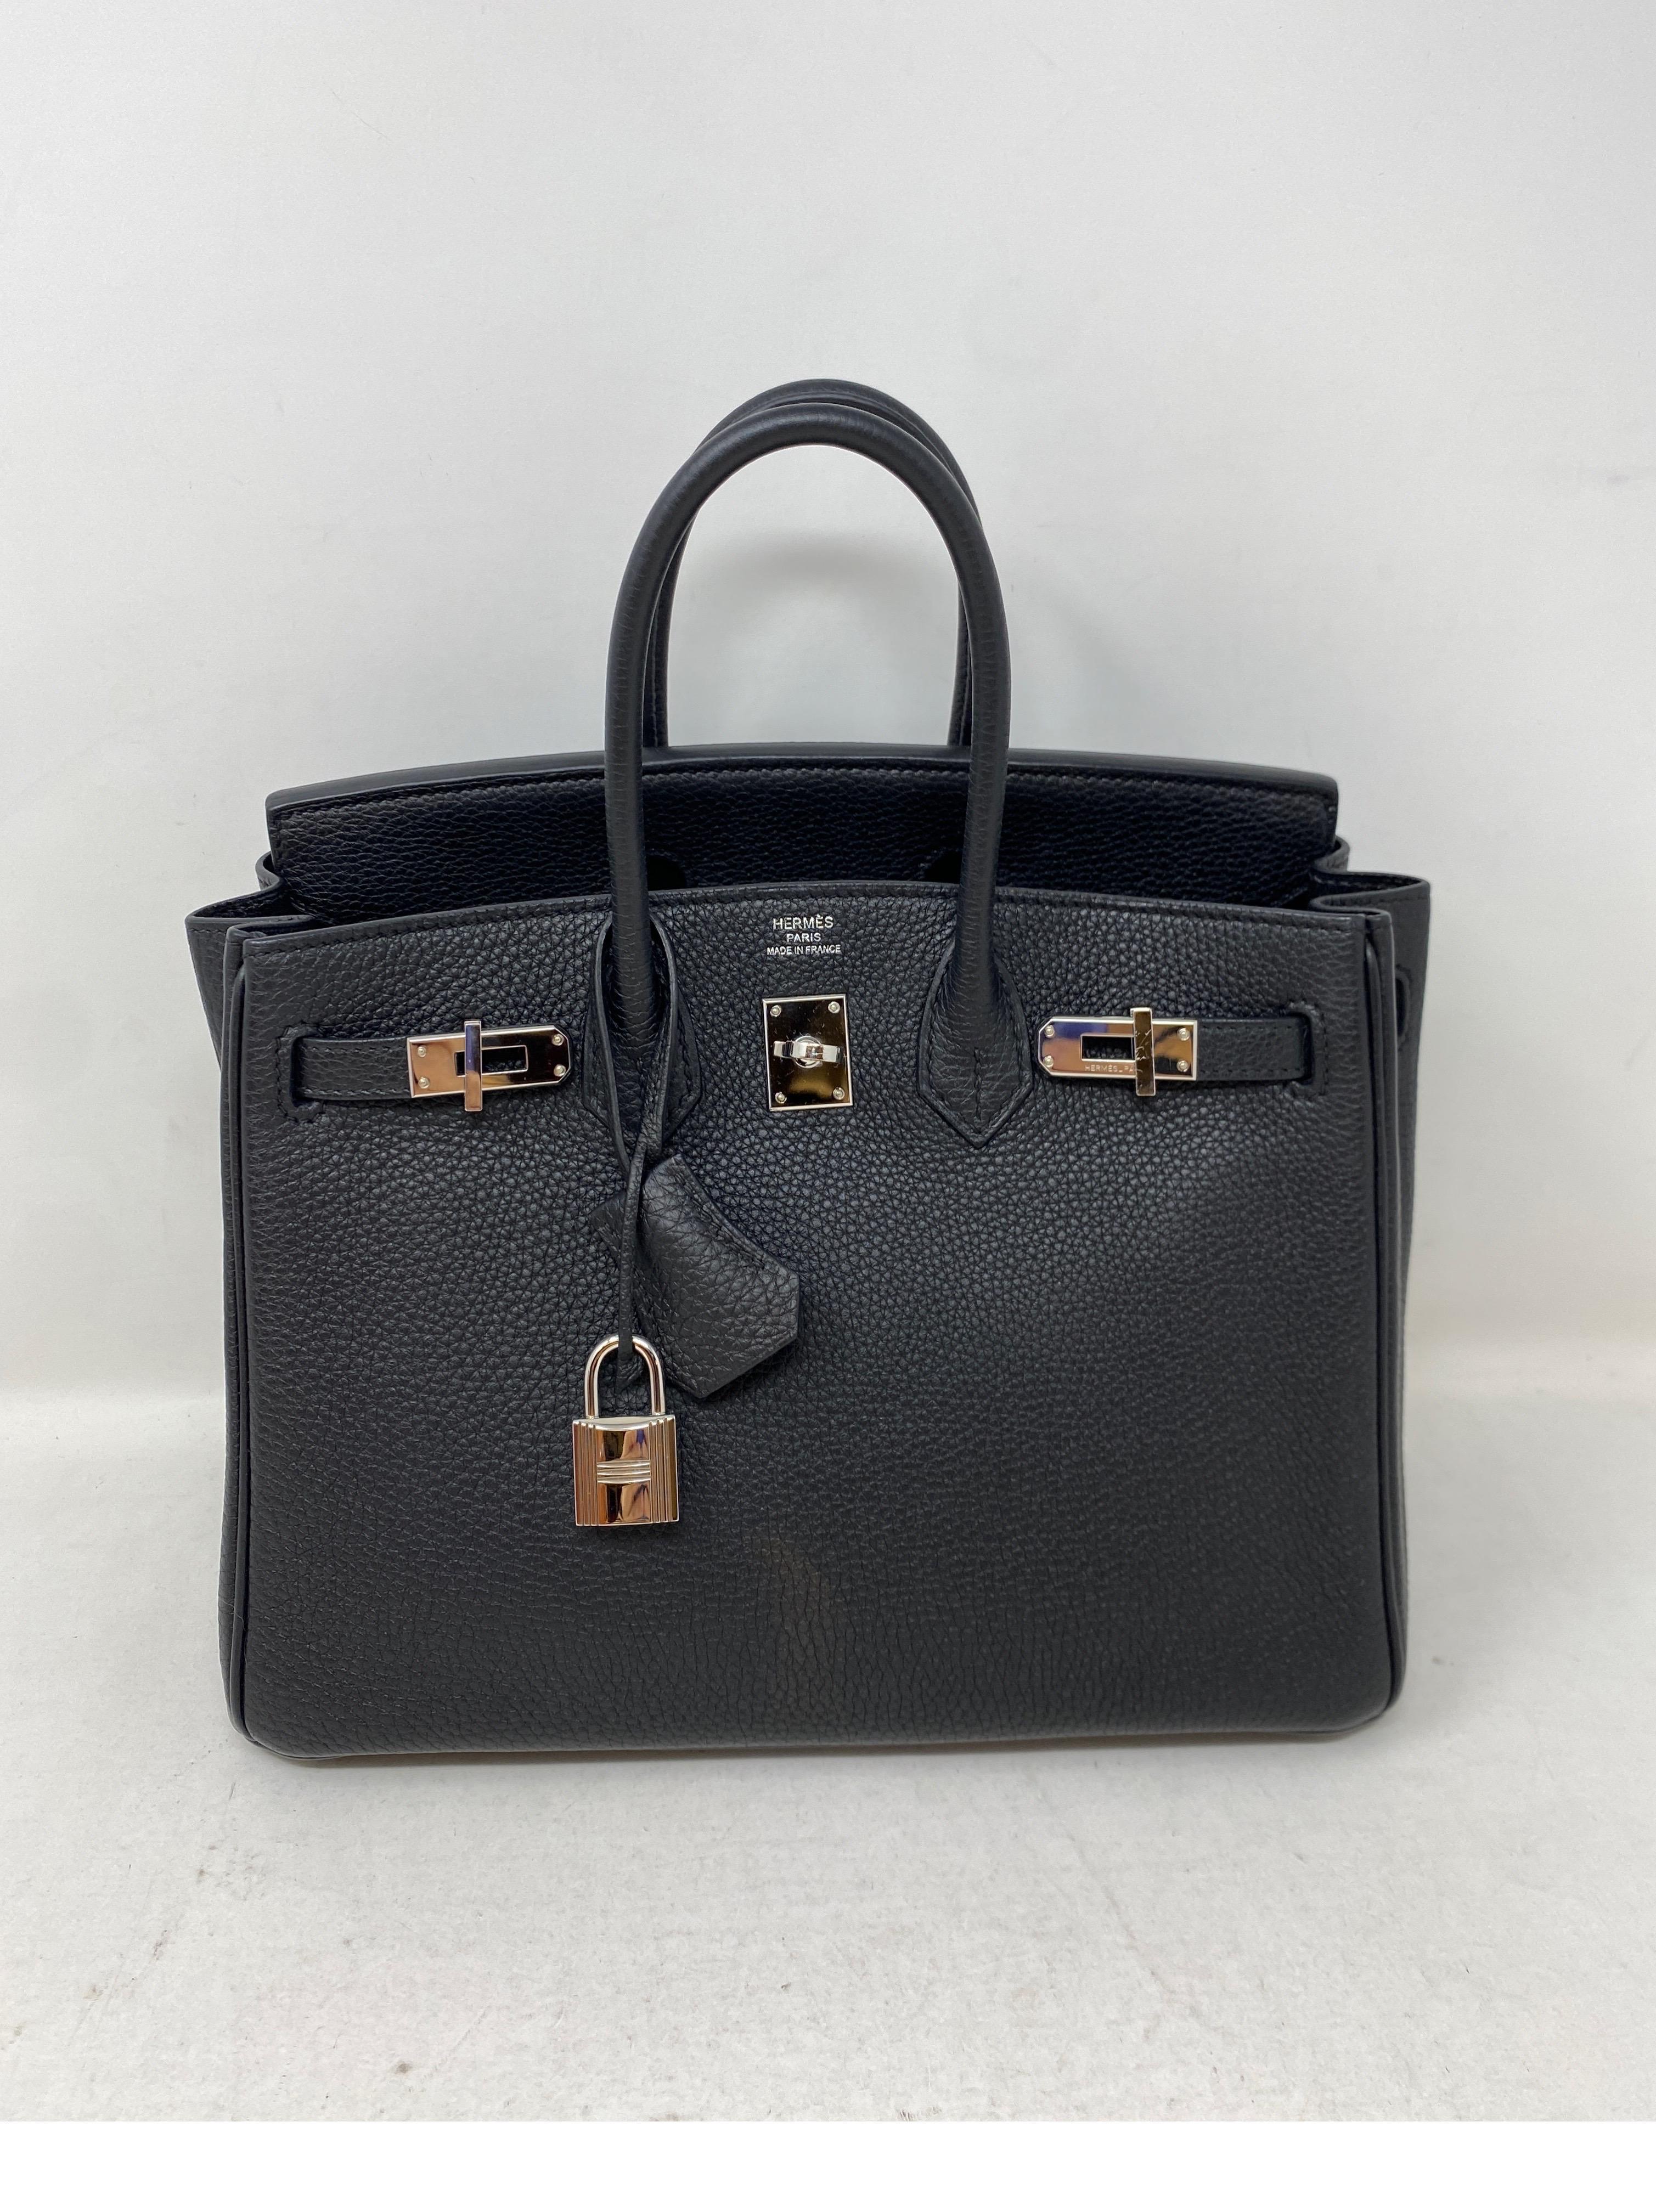 Hermes Black Birkin 25 Bag. The unicorn size and most wanted black color Birkin. Mini Birkin is a great investment. Only going up in value. Excellent condition. Looks like new. Includes clochette, lock, keys, and dust bag. Box also included. Don't